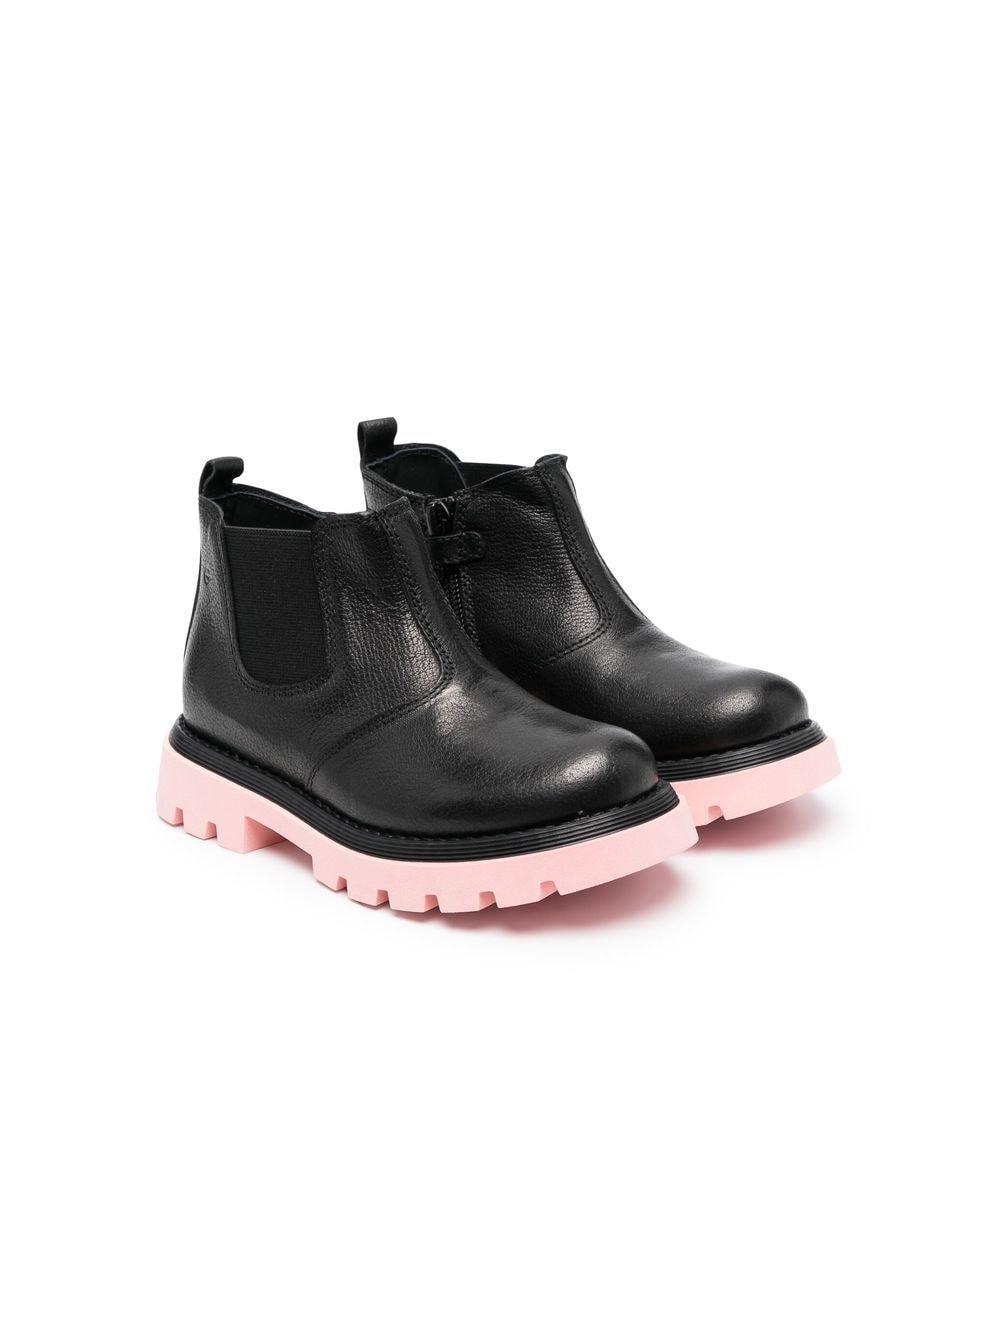 Image 1 of Gallucci Kids contrast-sole leather ankle boots